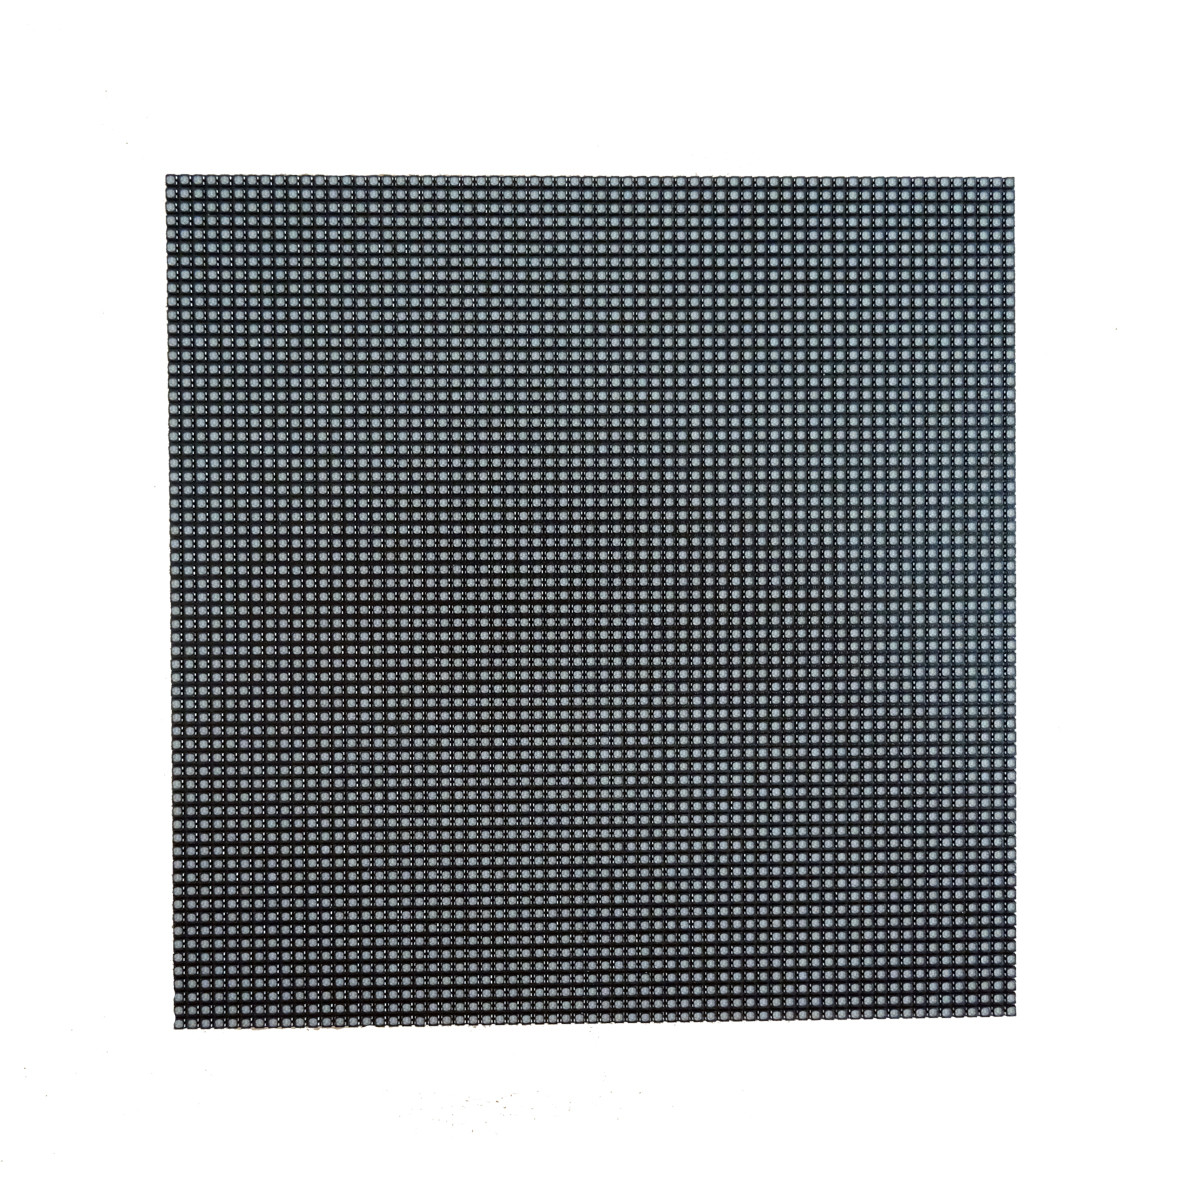 P2.5 Indoor SMD LED Display Module 160*160mm SMD2121 800cd/㎡ Brightness 1920Hz Refresh Frequency